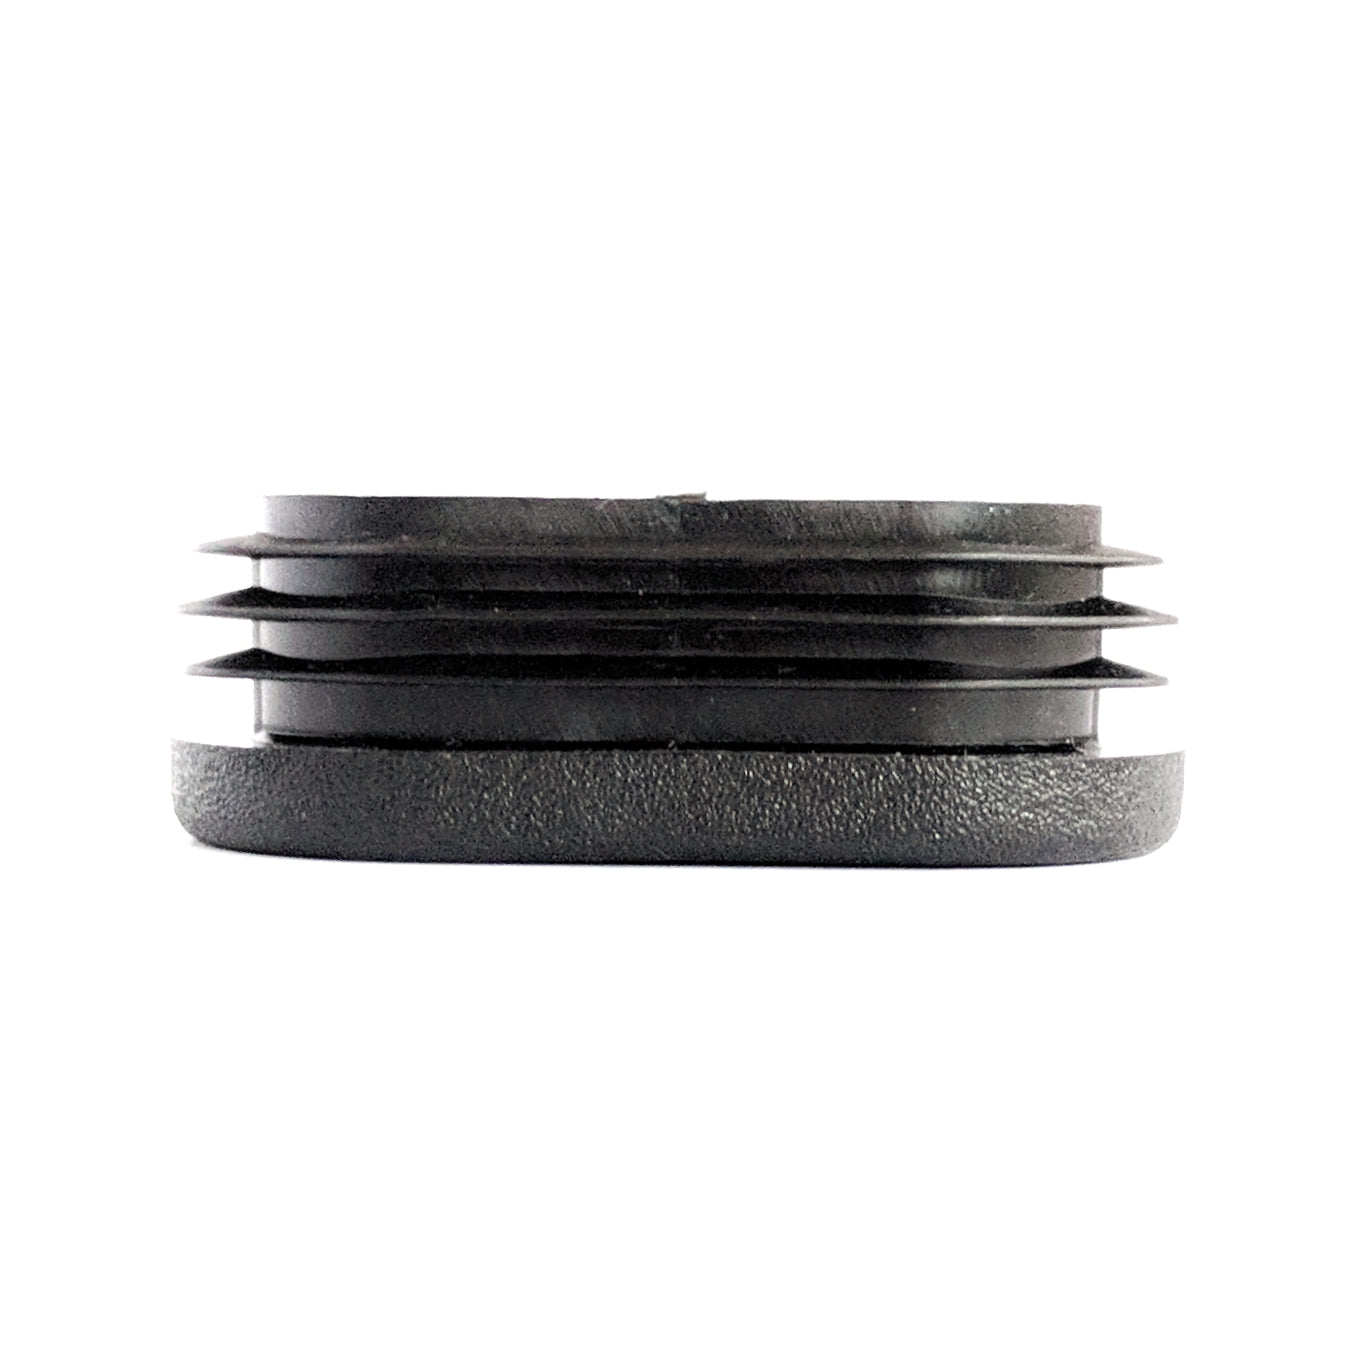 Oval Tube Inserts 50mm x 30mm | Made in Germany | Keay Vital Parts - Keay Vital Parts